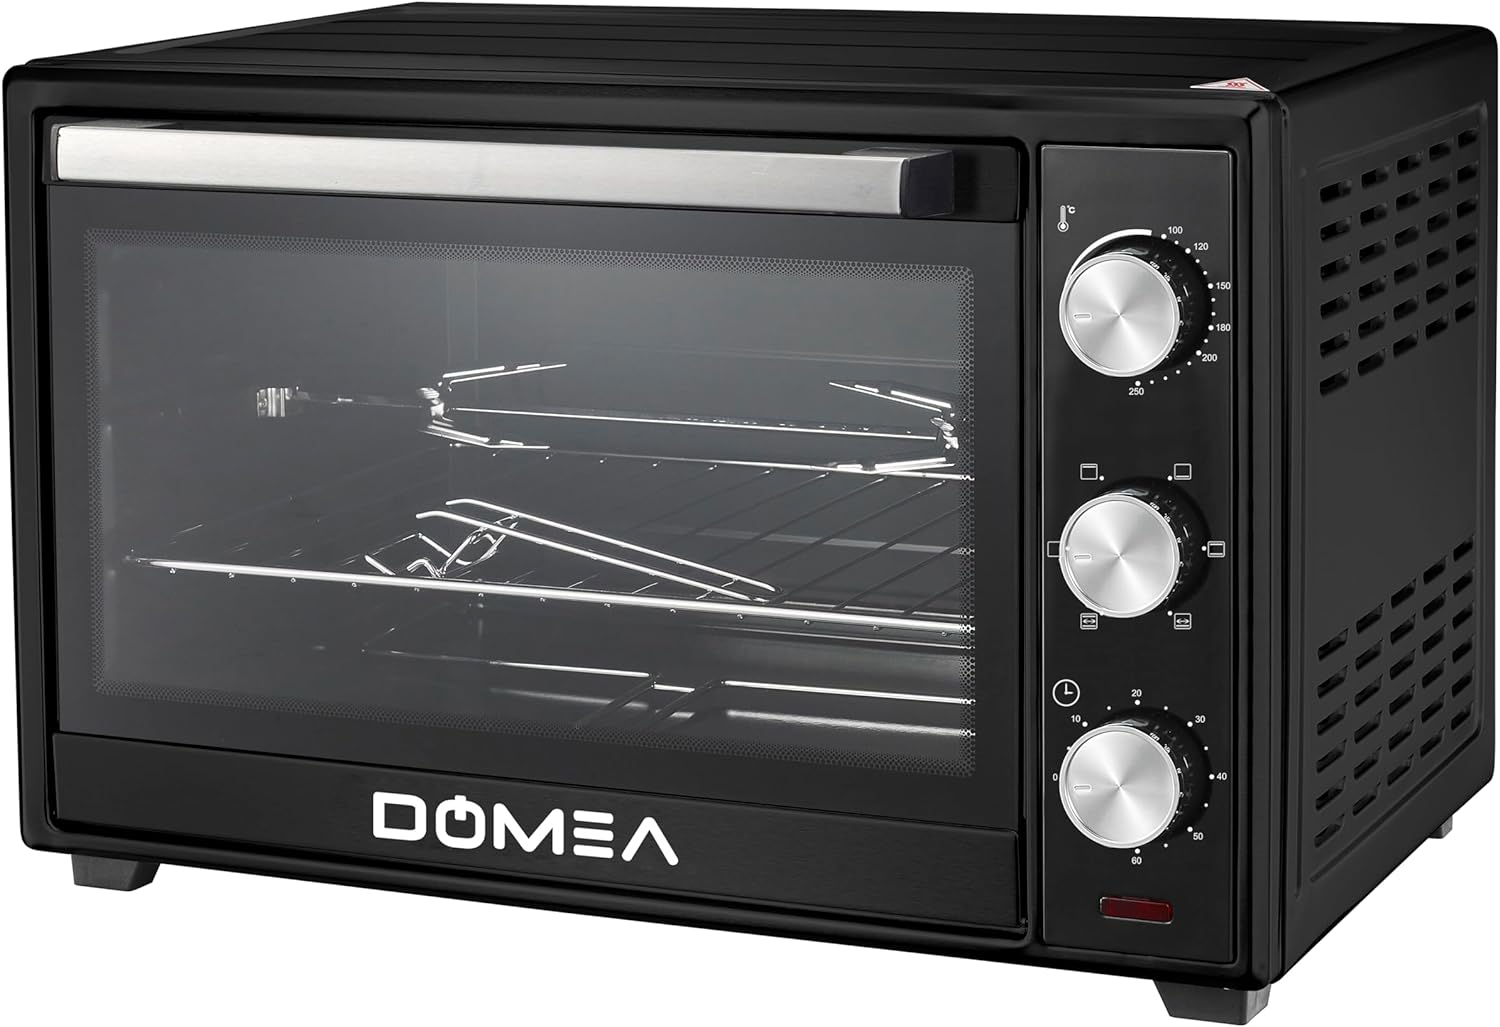 Domea electric toaster oven | counter top oven with rotisserie function | grill and cooking tray | adjustable heat settings | 60 minutes timer, 25 litre, 1600w